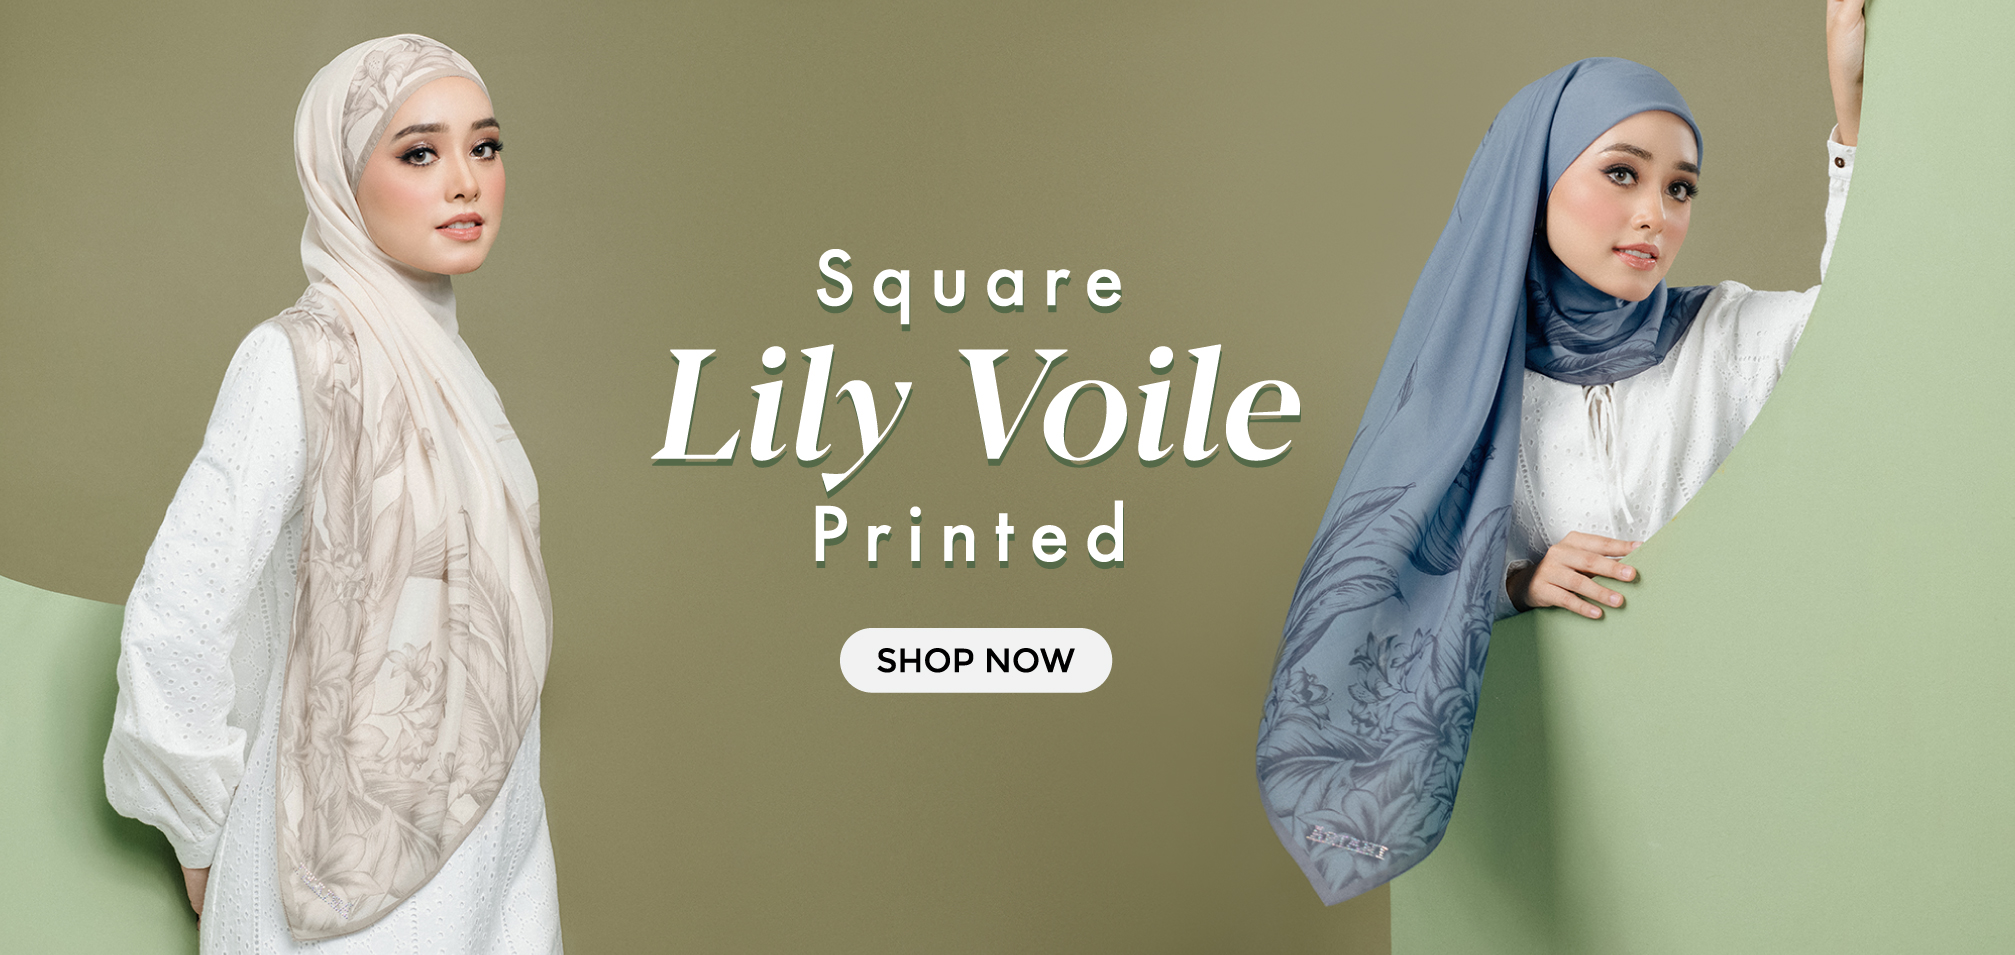 SQ LILY VOILE